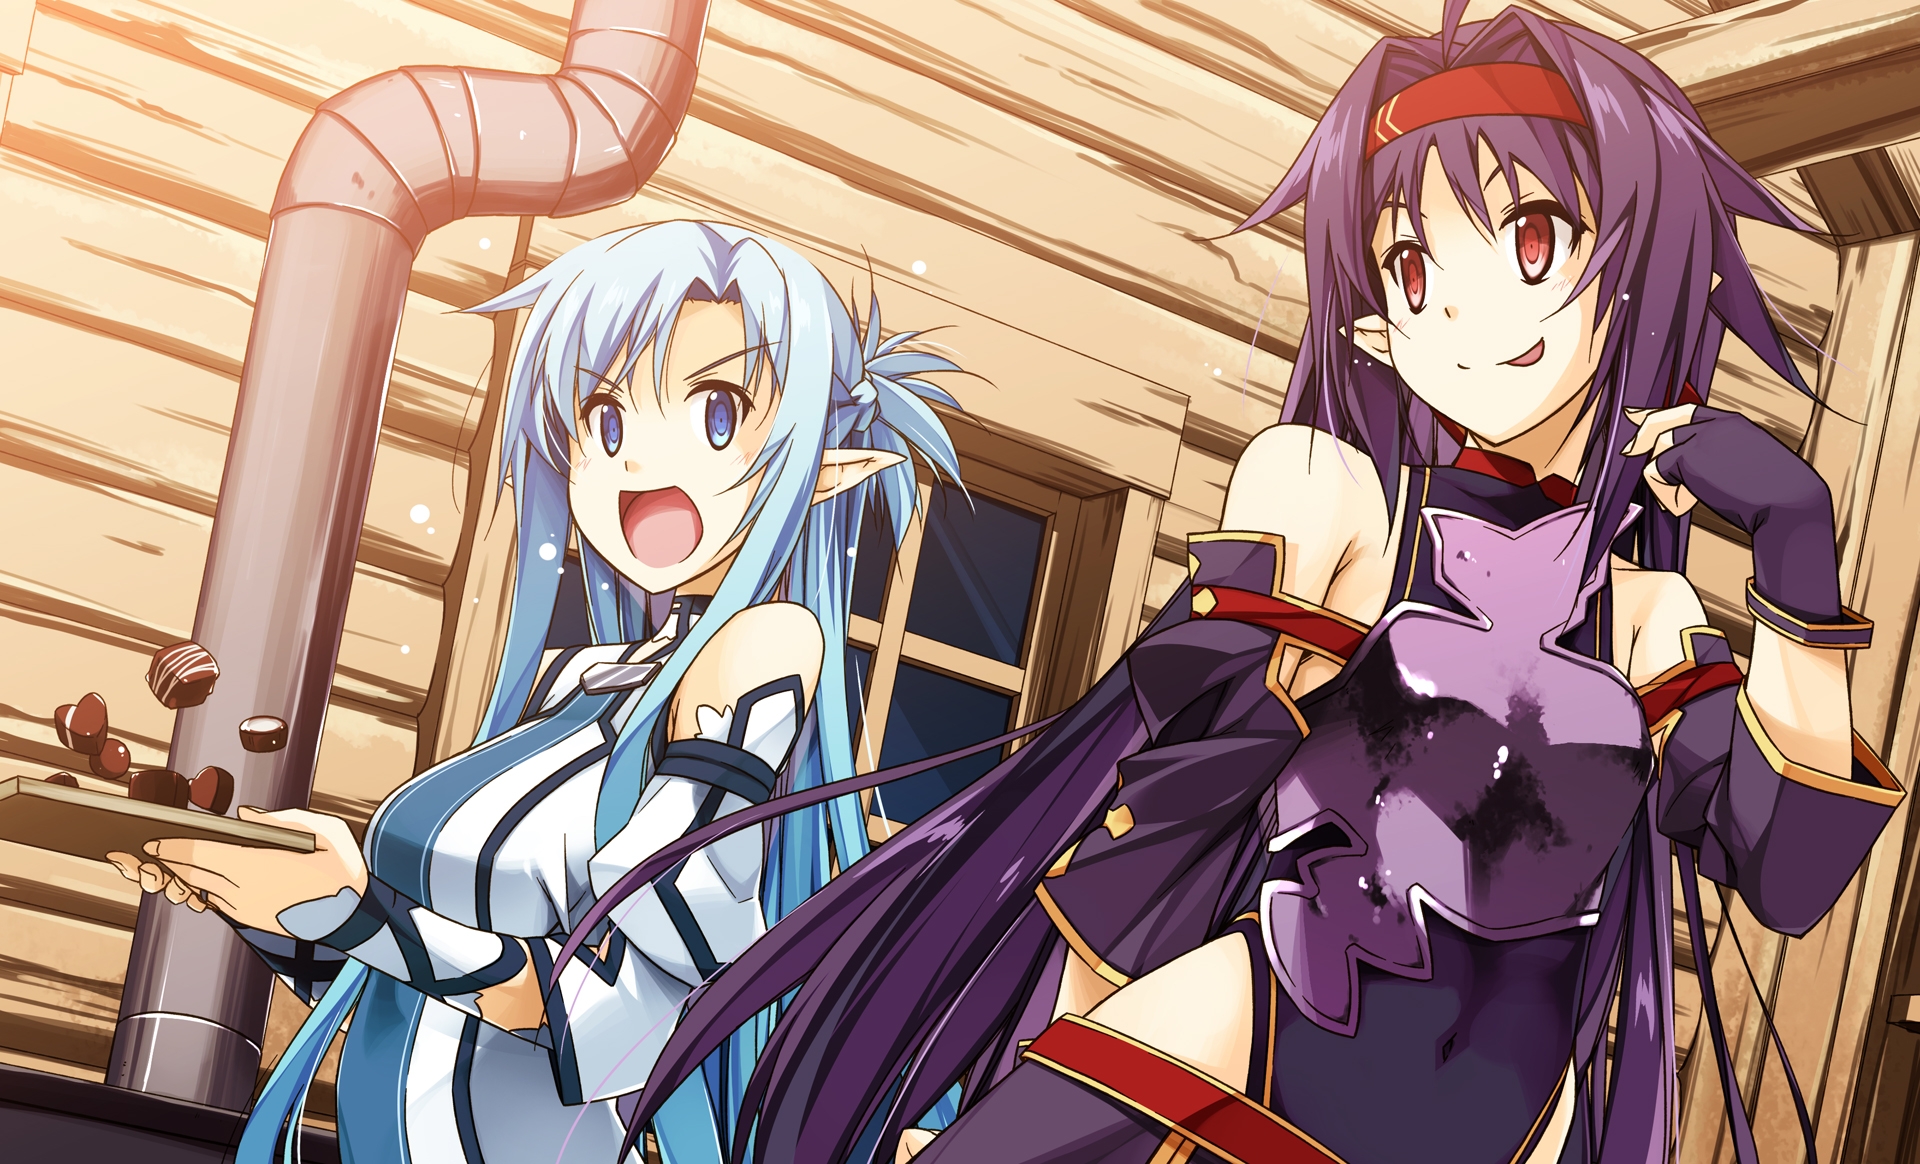 Shikei, tongue out, blue hair, purple hair, blue eyes, red eyes, Yuuki  Asuna (Sword Art Online), two women, Sword Art Online, anime, Konno Yuuki,  anime girls, elves, pointy ears